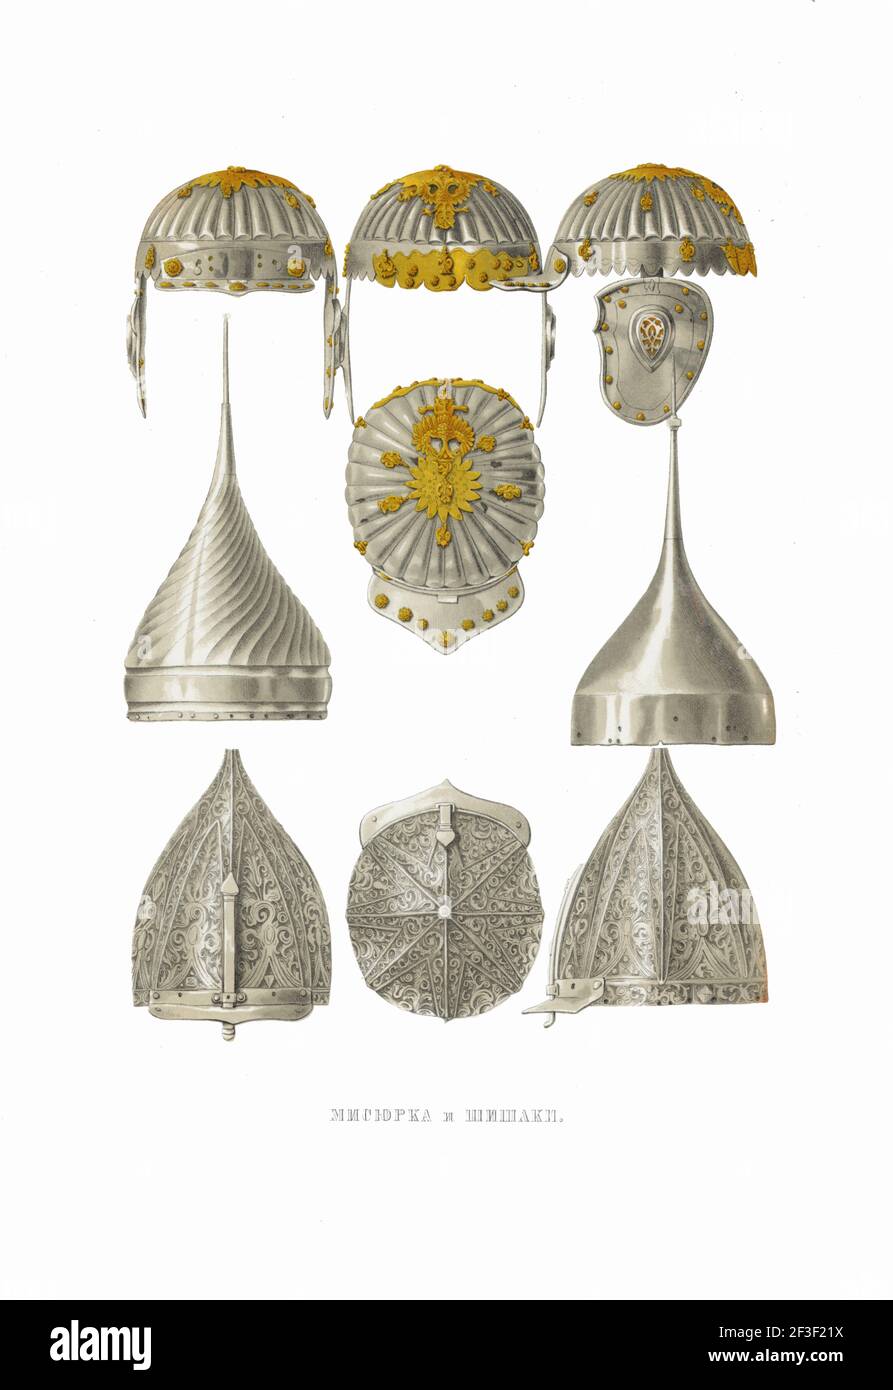 Misiurka Helmet and Shishaks. From the Antiquities of the Russian State, 1849-1853. Private Collection. Stock Photo